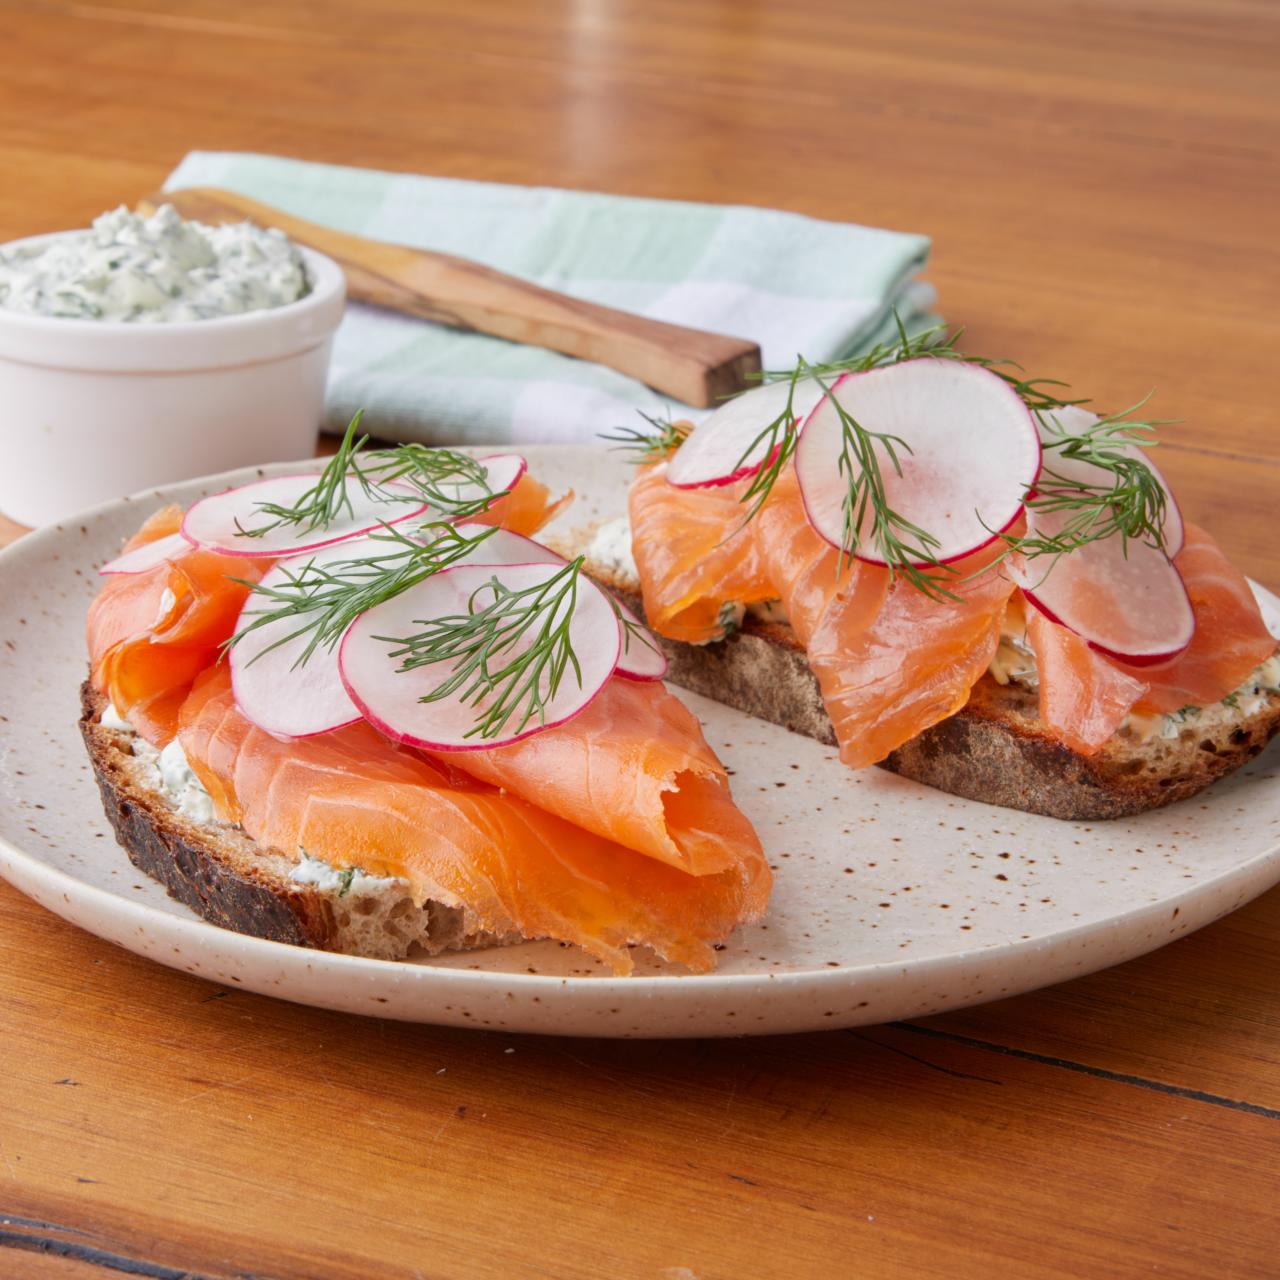 https://food.fnr.sndimg.com/content/dam/images/food/plus/fullset/2020/03/10/0/FNP_Jeppe-Kil-Anderson_Open-Rye-Sandwich-with-Smoked-Salmon-Herb-Cream-Cheese-and-Radishes_s4x3.jpg.rend.hgtvcom.1280.1280.suffix/1583847749599.jpeg